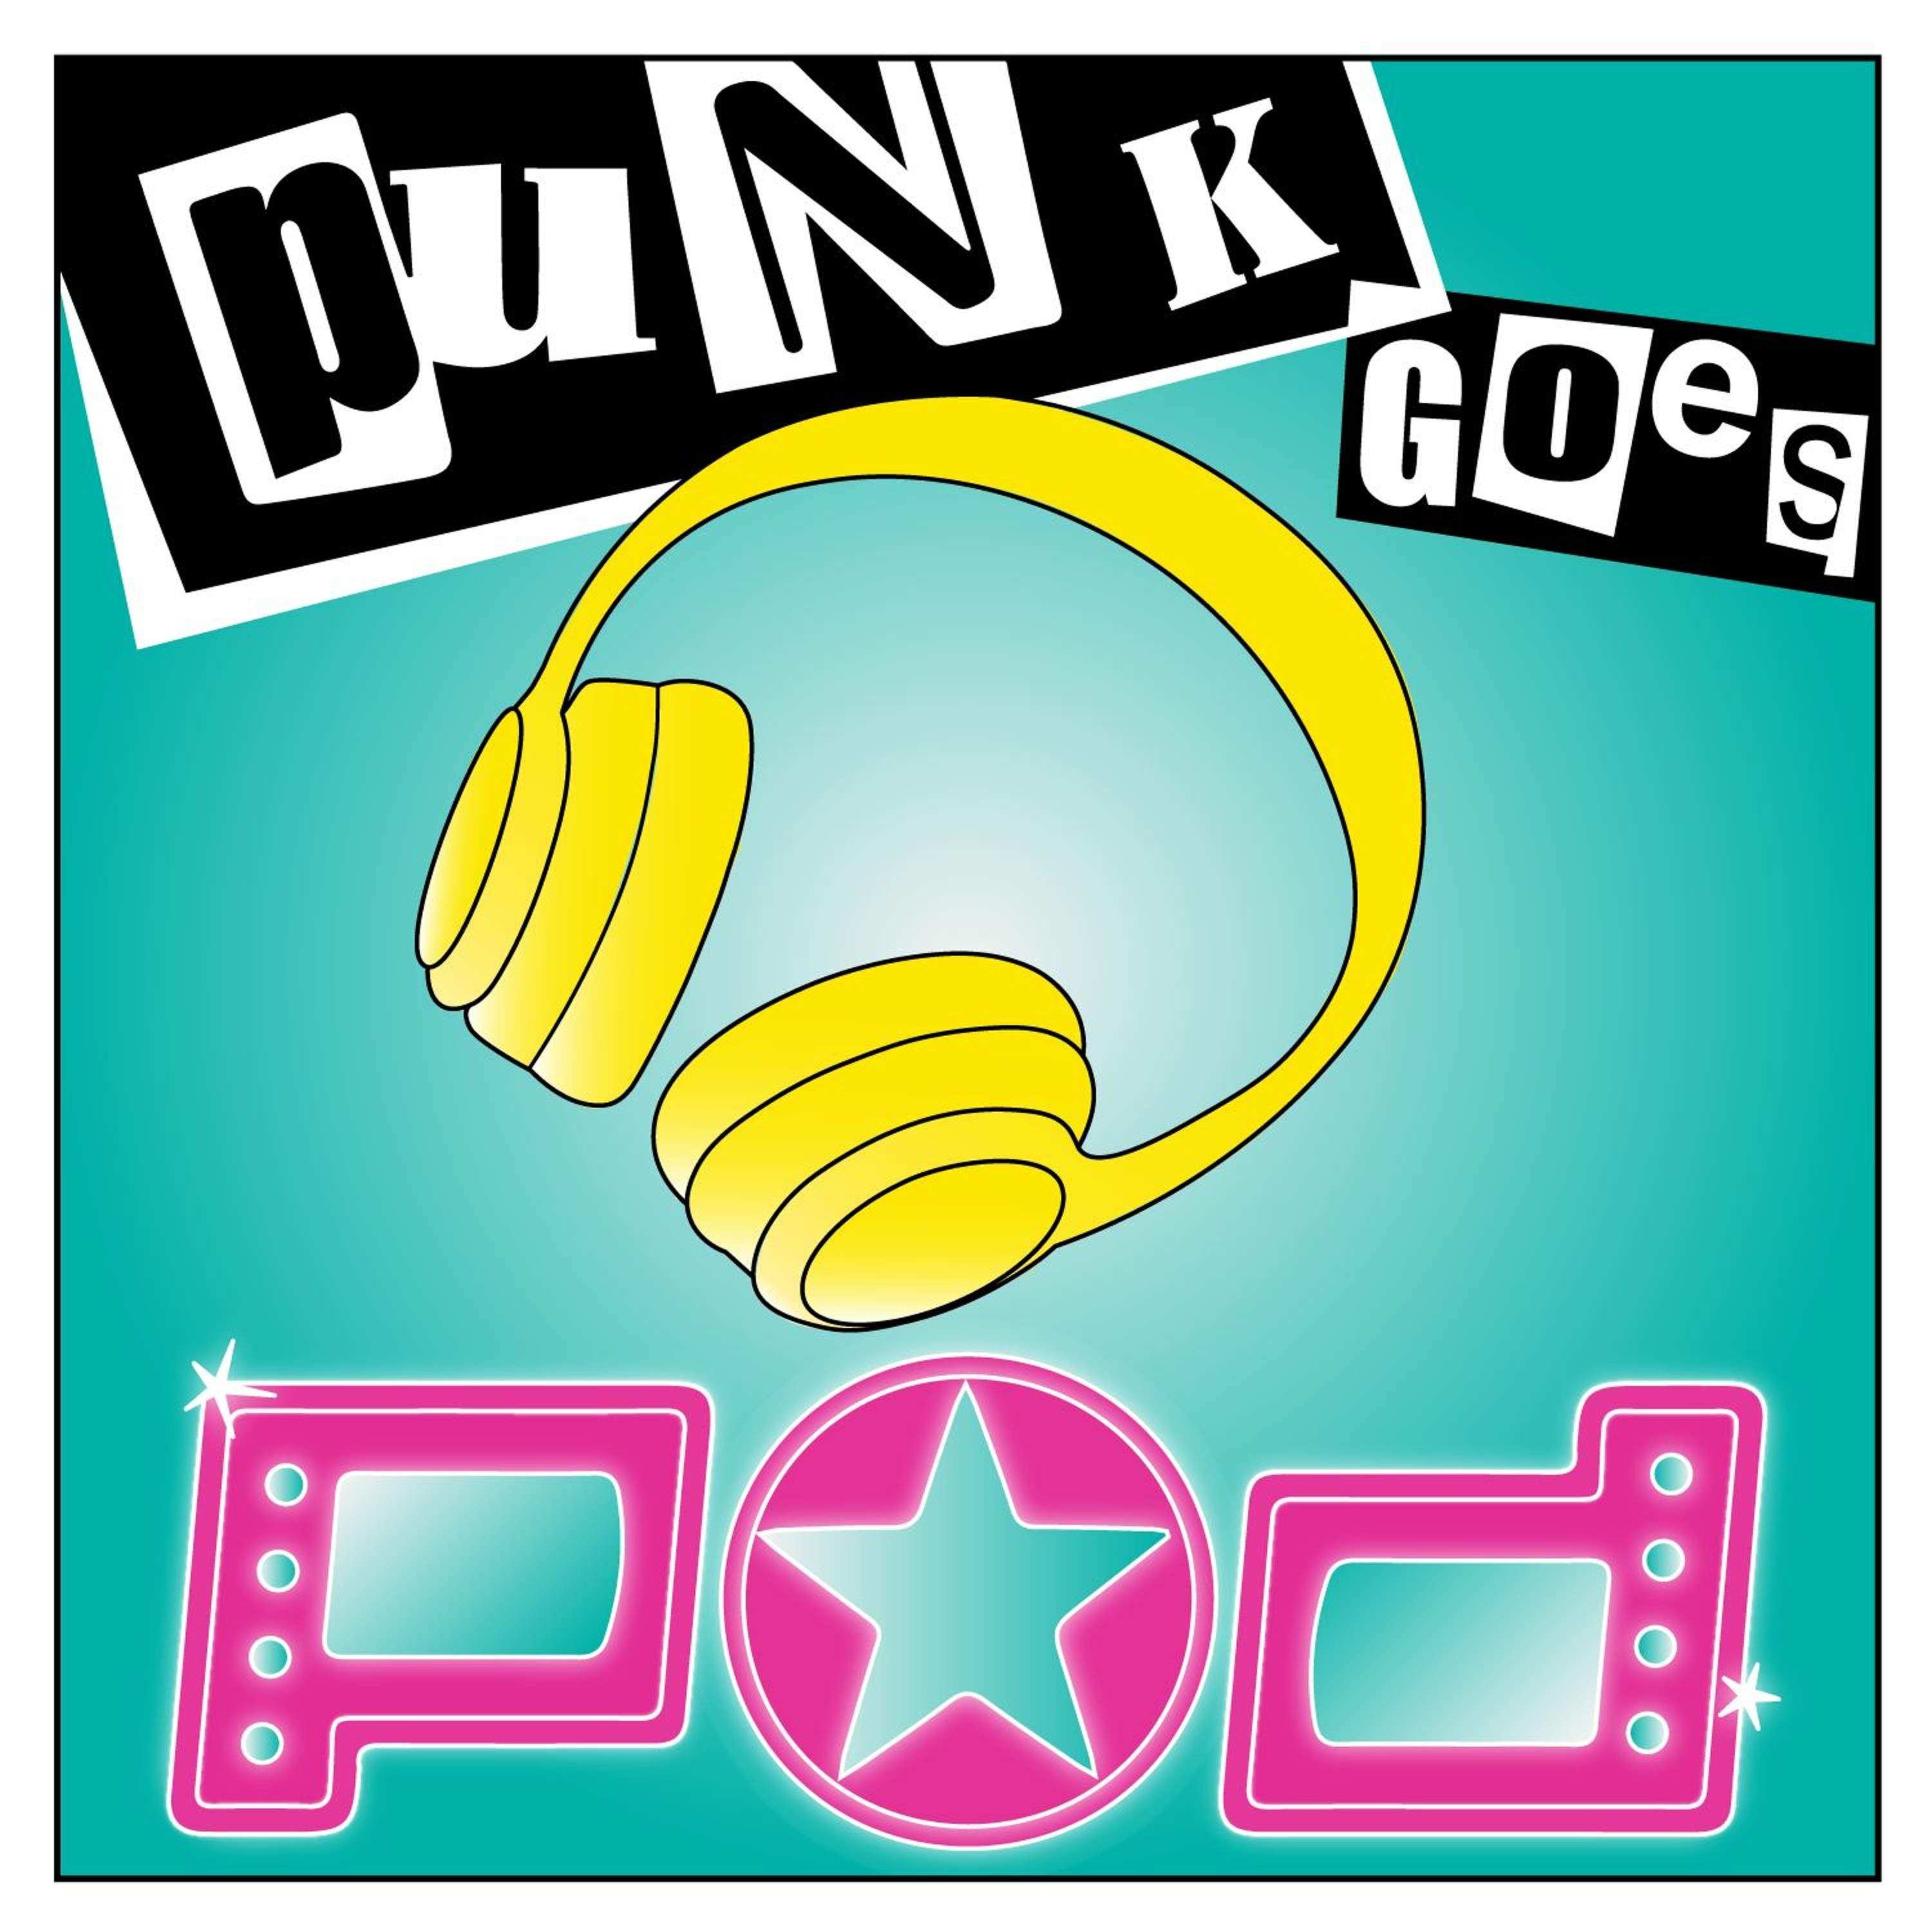 50 All Star Smash Mouth Chunk No Captain Chunk By Punk Goes Pod Podchaser